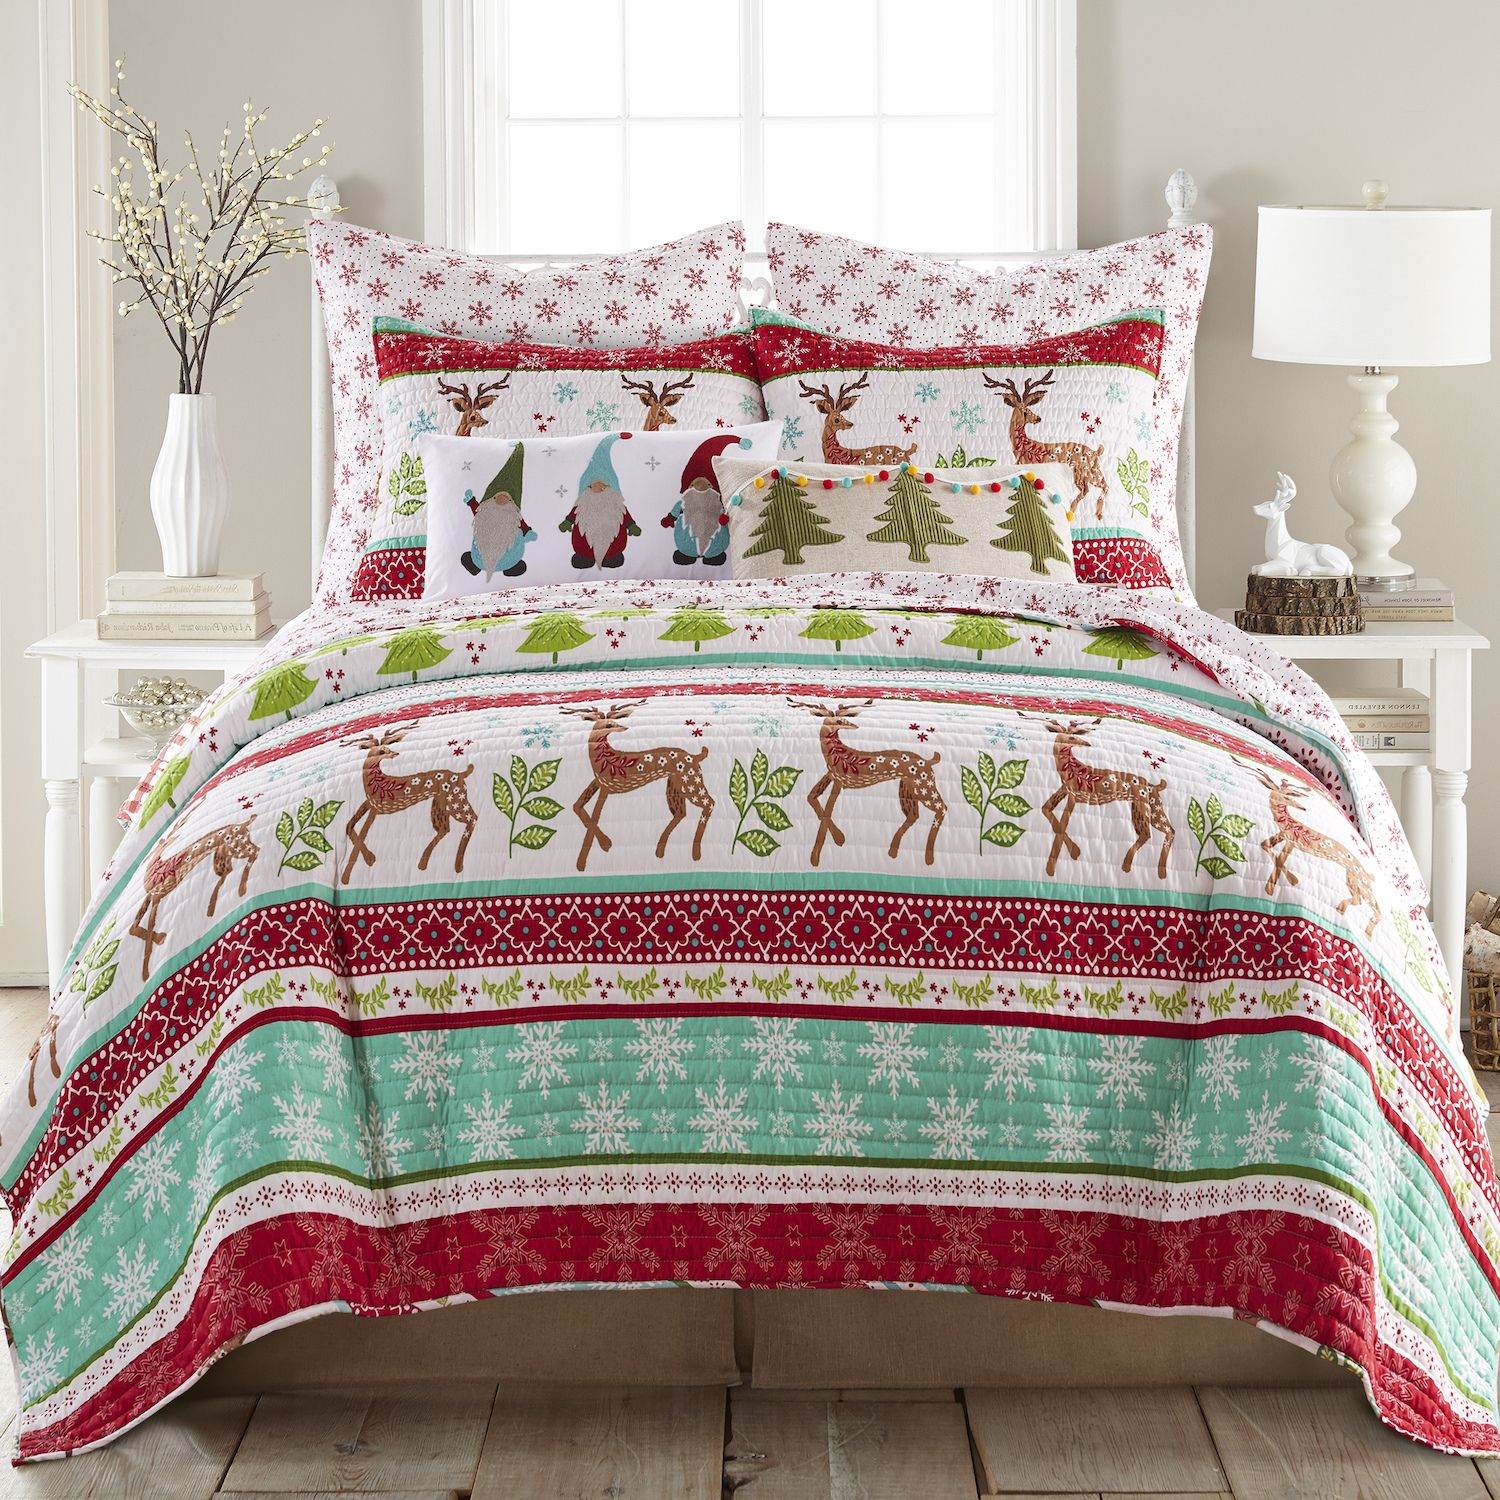 Image for Levtex Home Let It Snow Quilt Set at Kohl's.